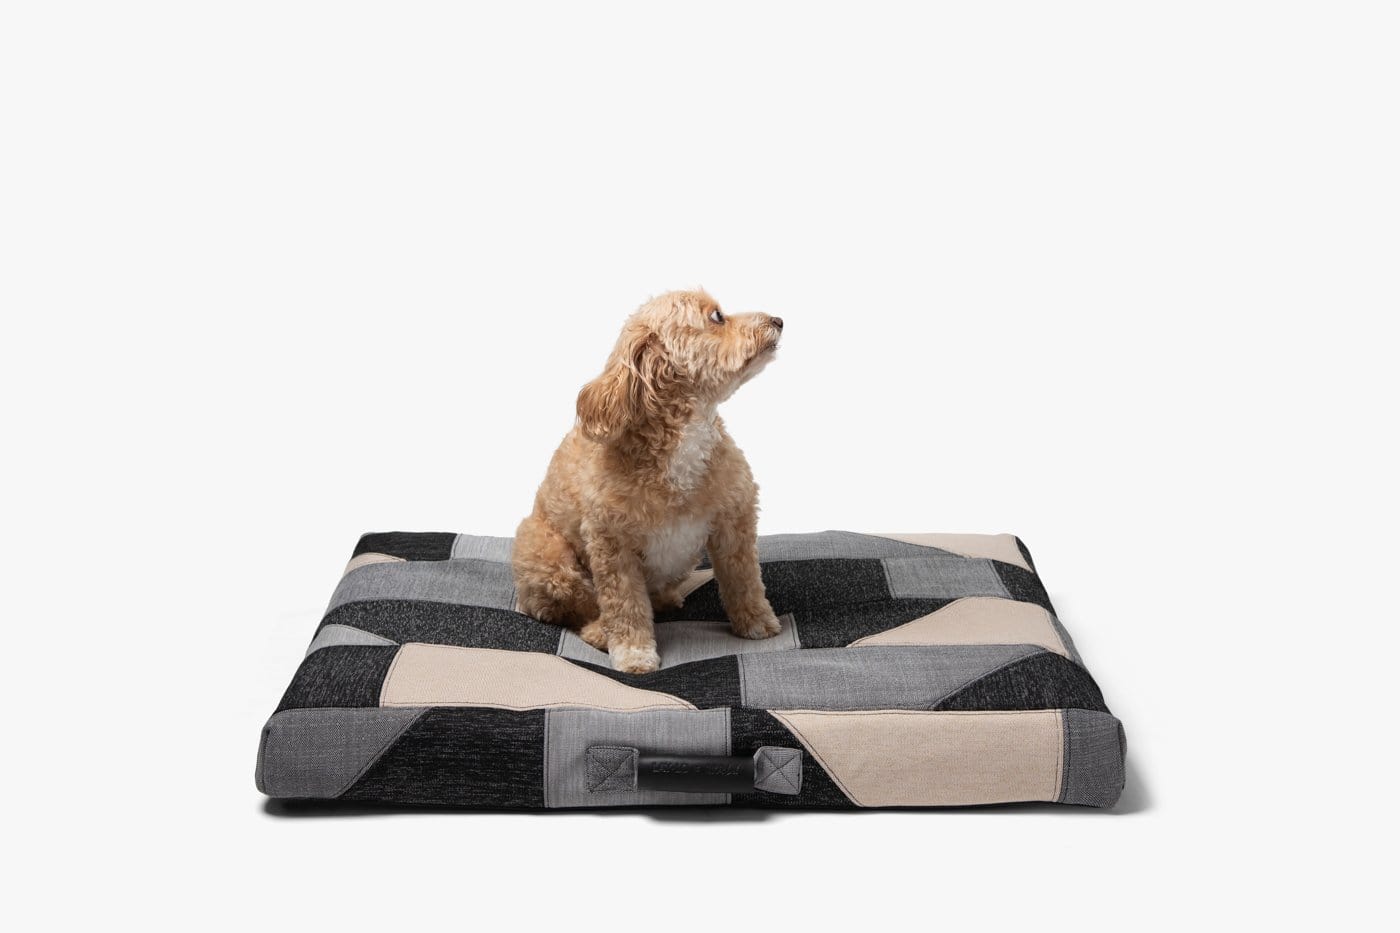 Laylo Pets ReMade LAY LO ReMade Handcrafted Dog Bed or Cover: Patchwork #02 Lay Lo Pets